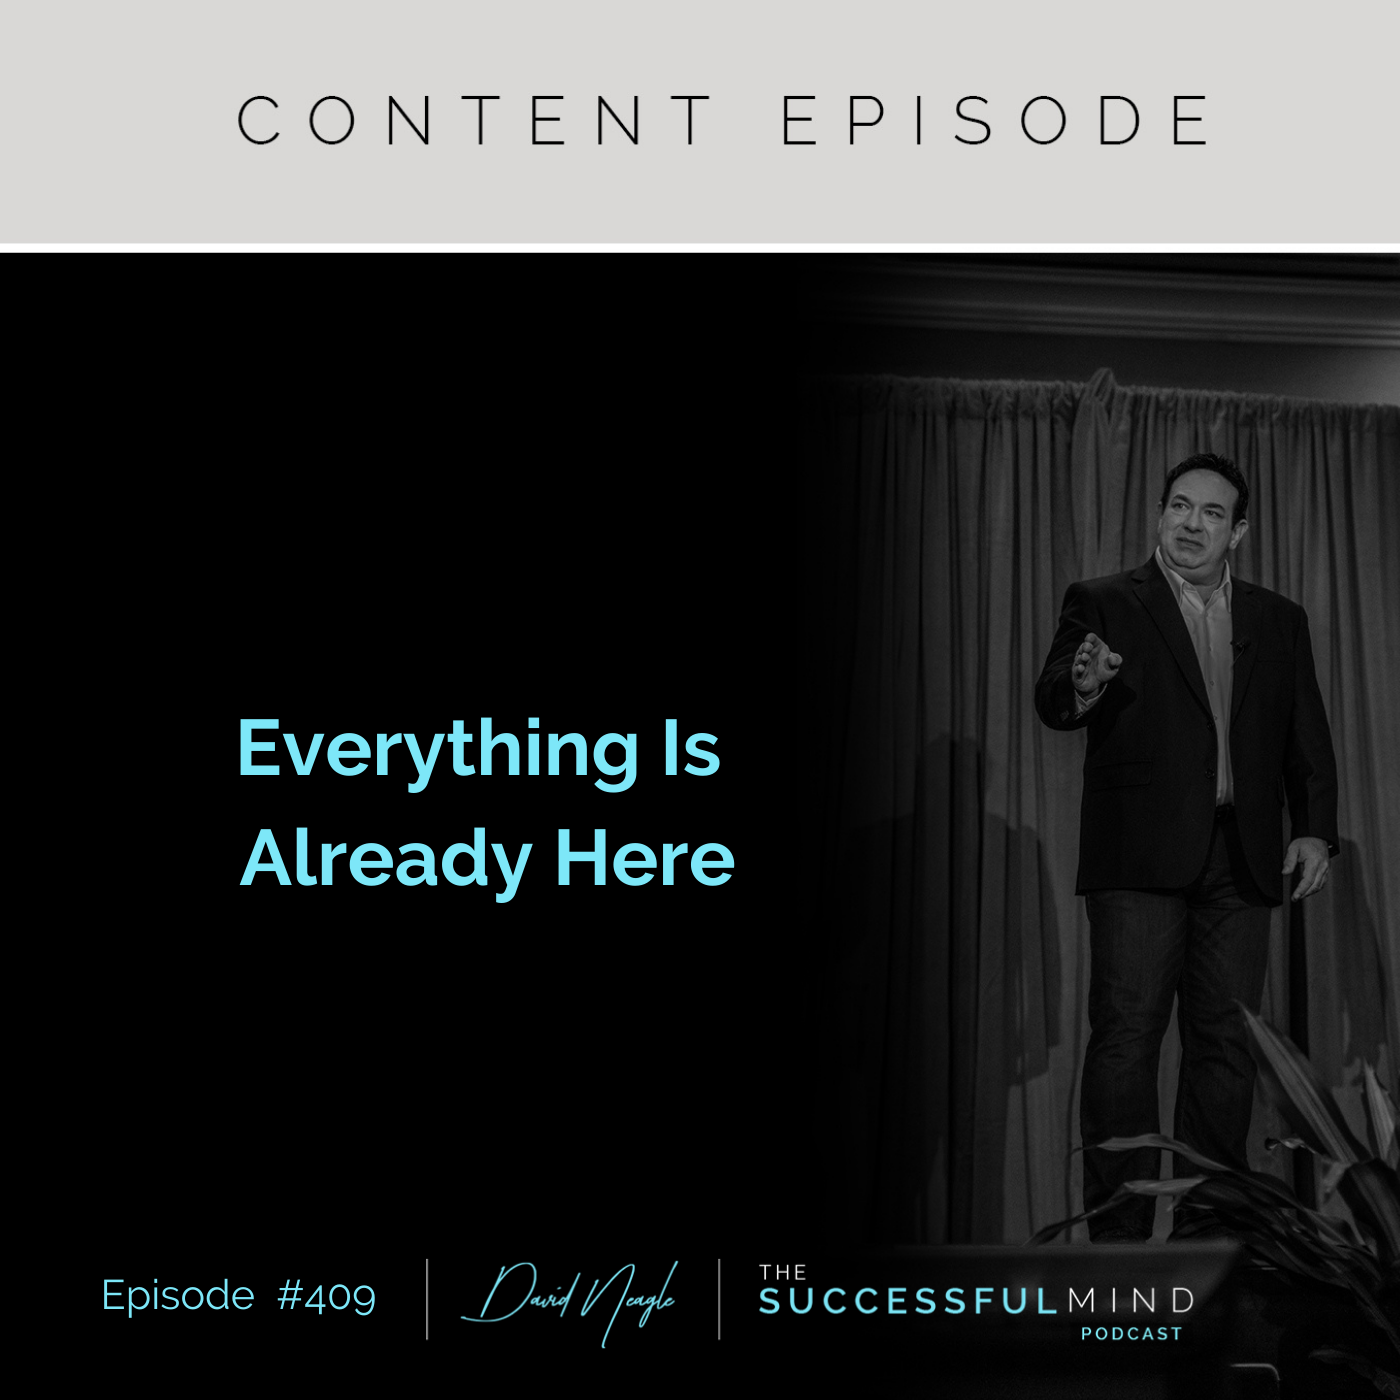 The Successful Mind Podcast - Episode 409 - Everything Is Already Here